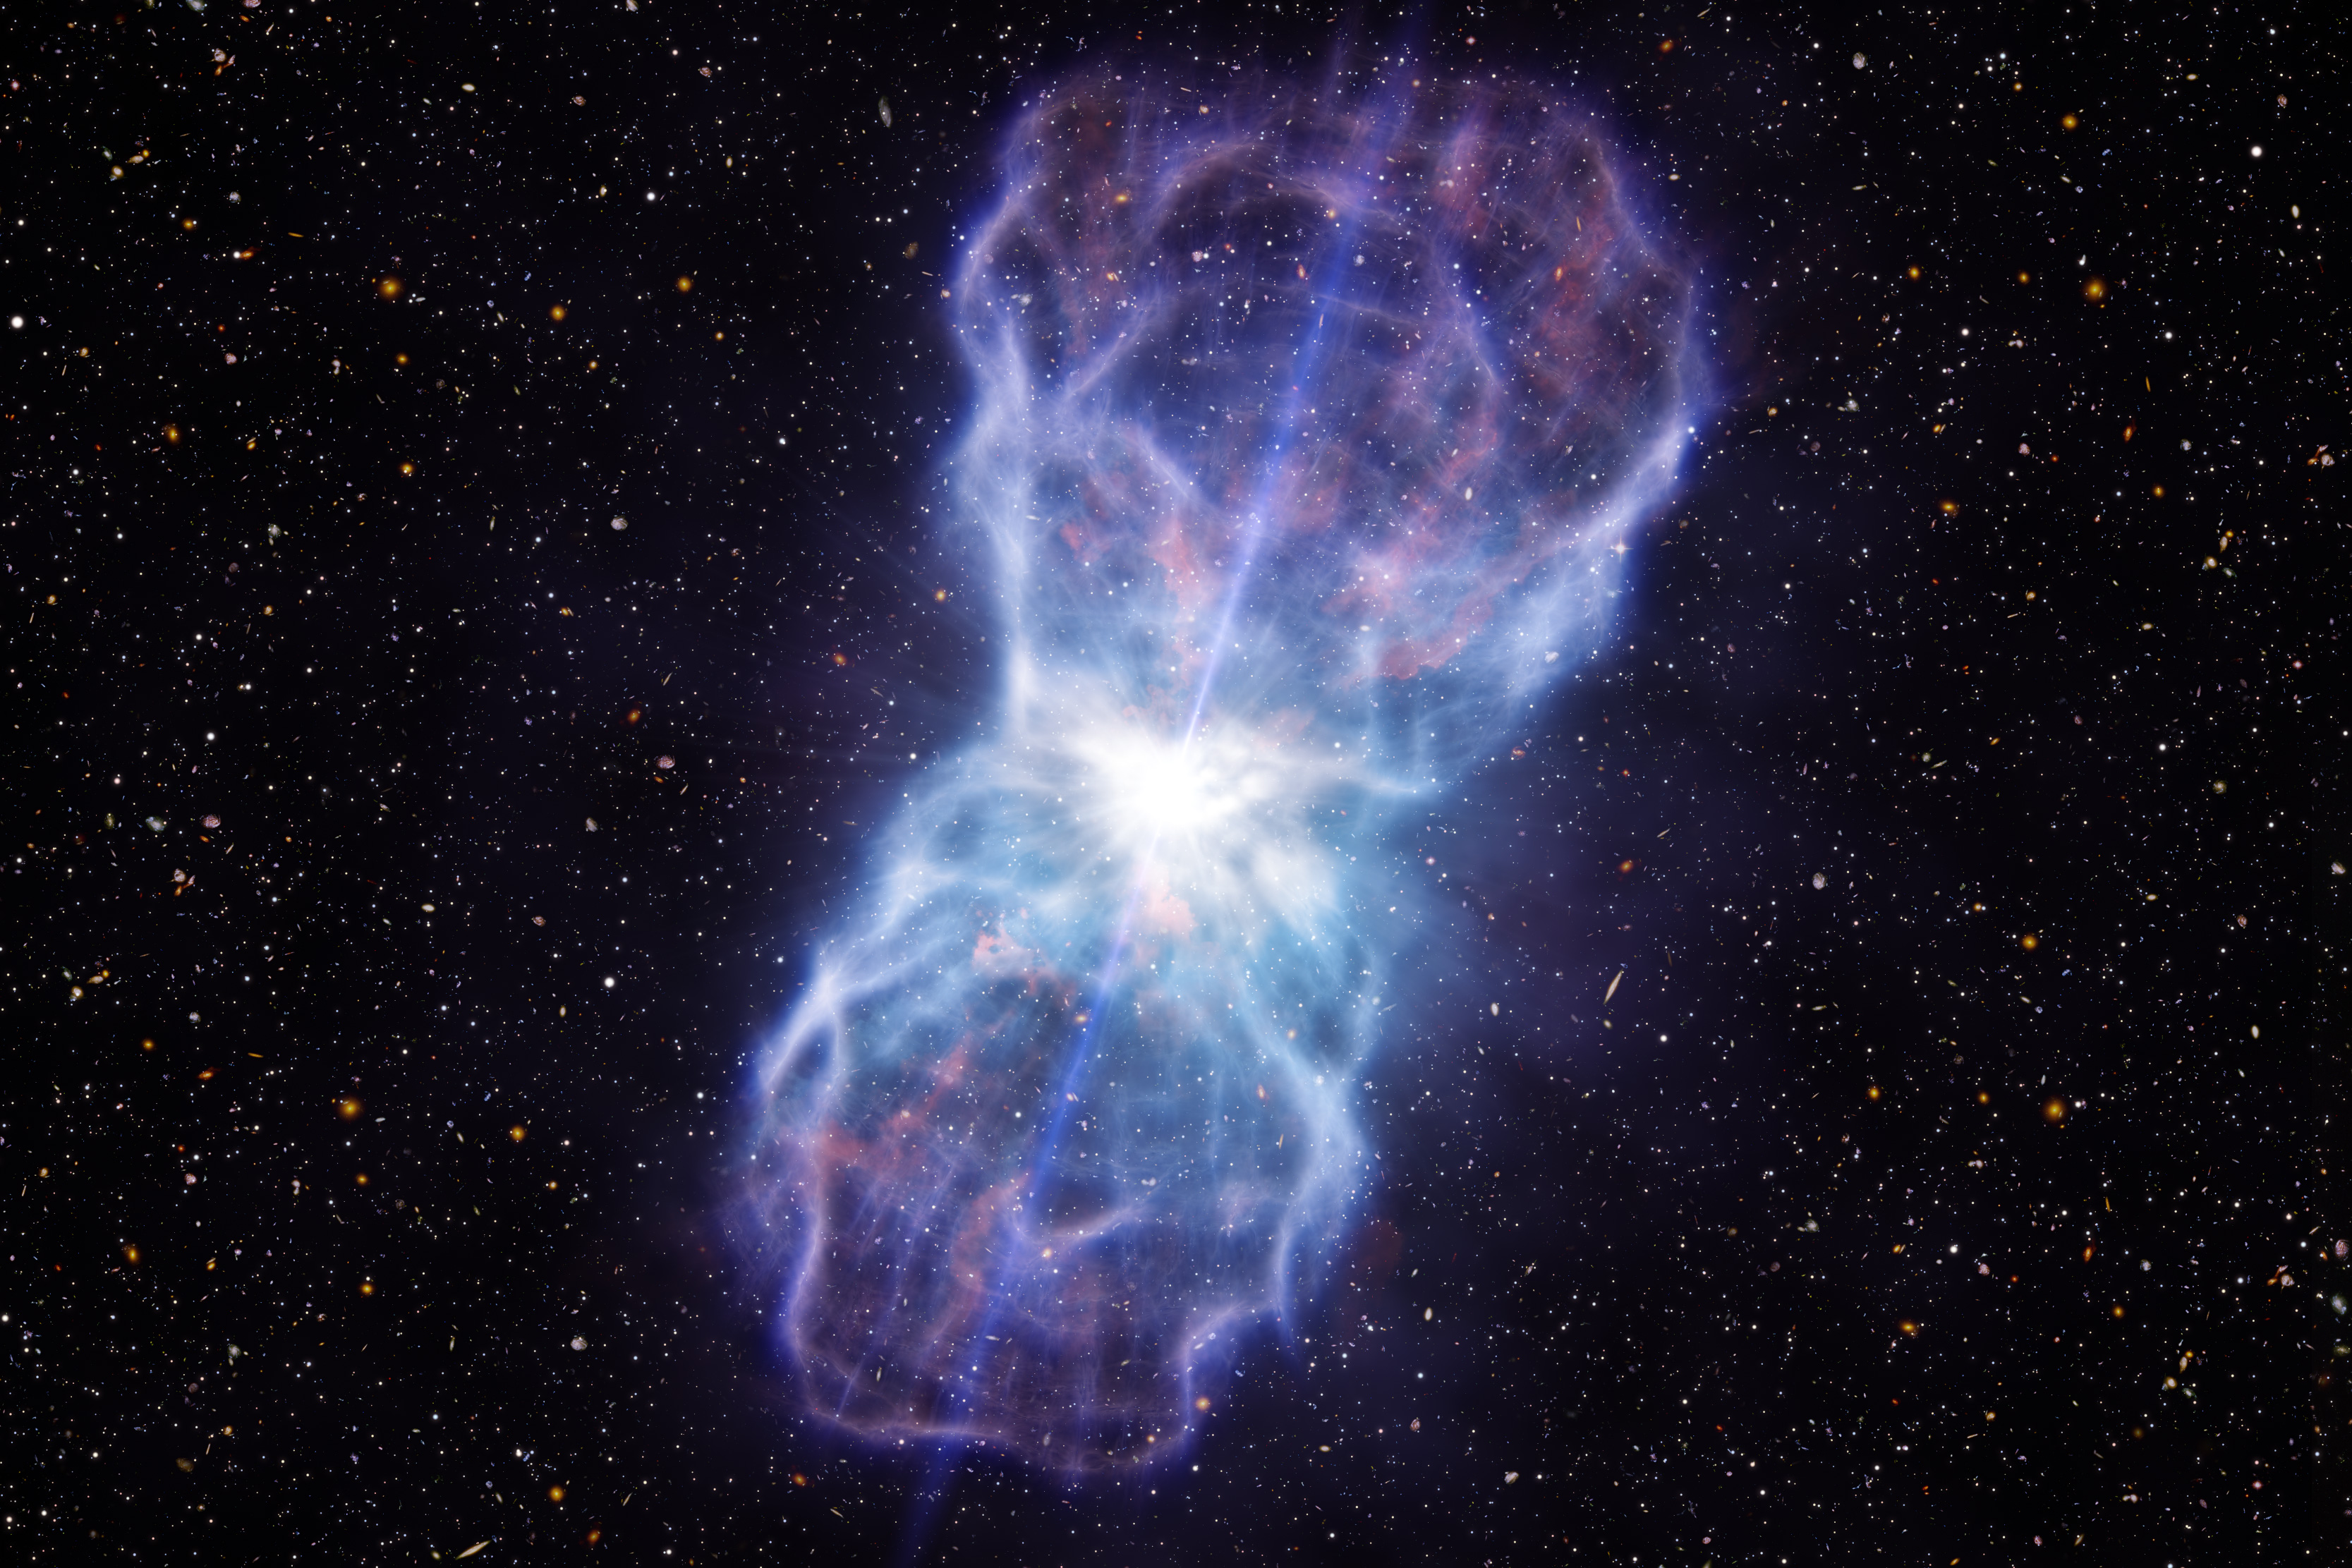 Artist’s impression of the huge outflow ejected from the quasar SDSS J1106+1939 by ESO